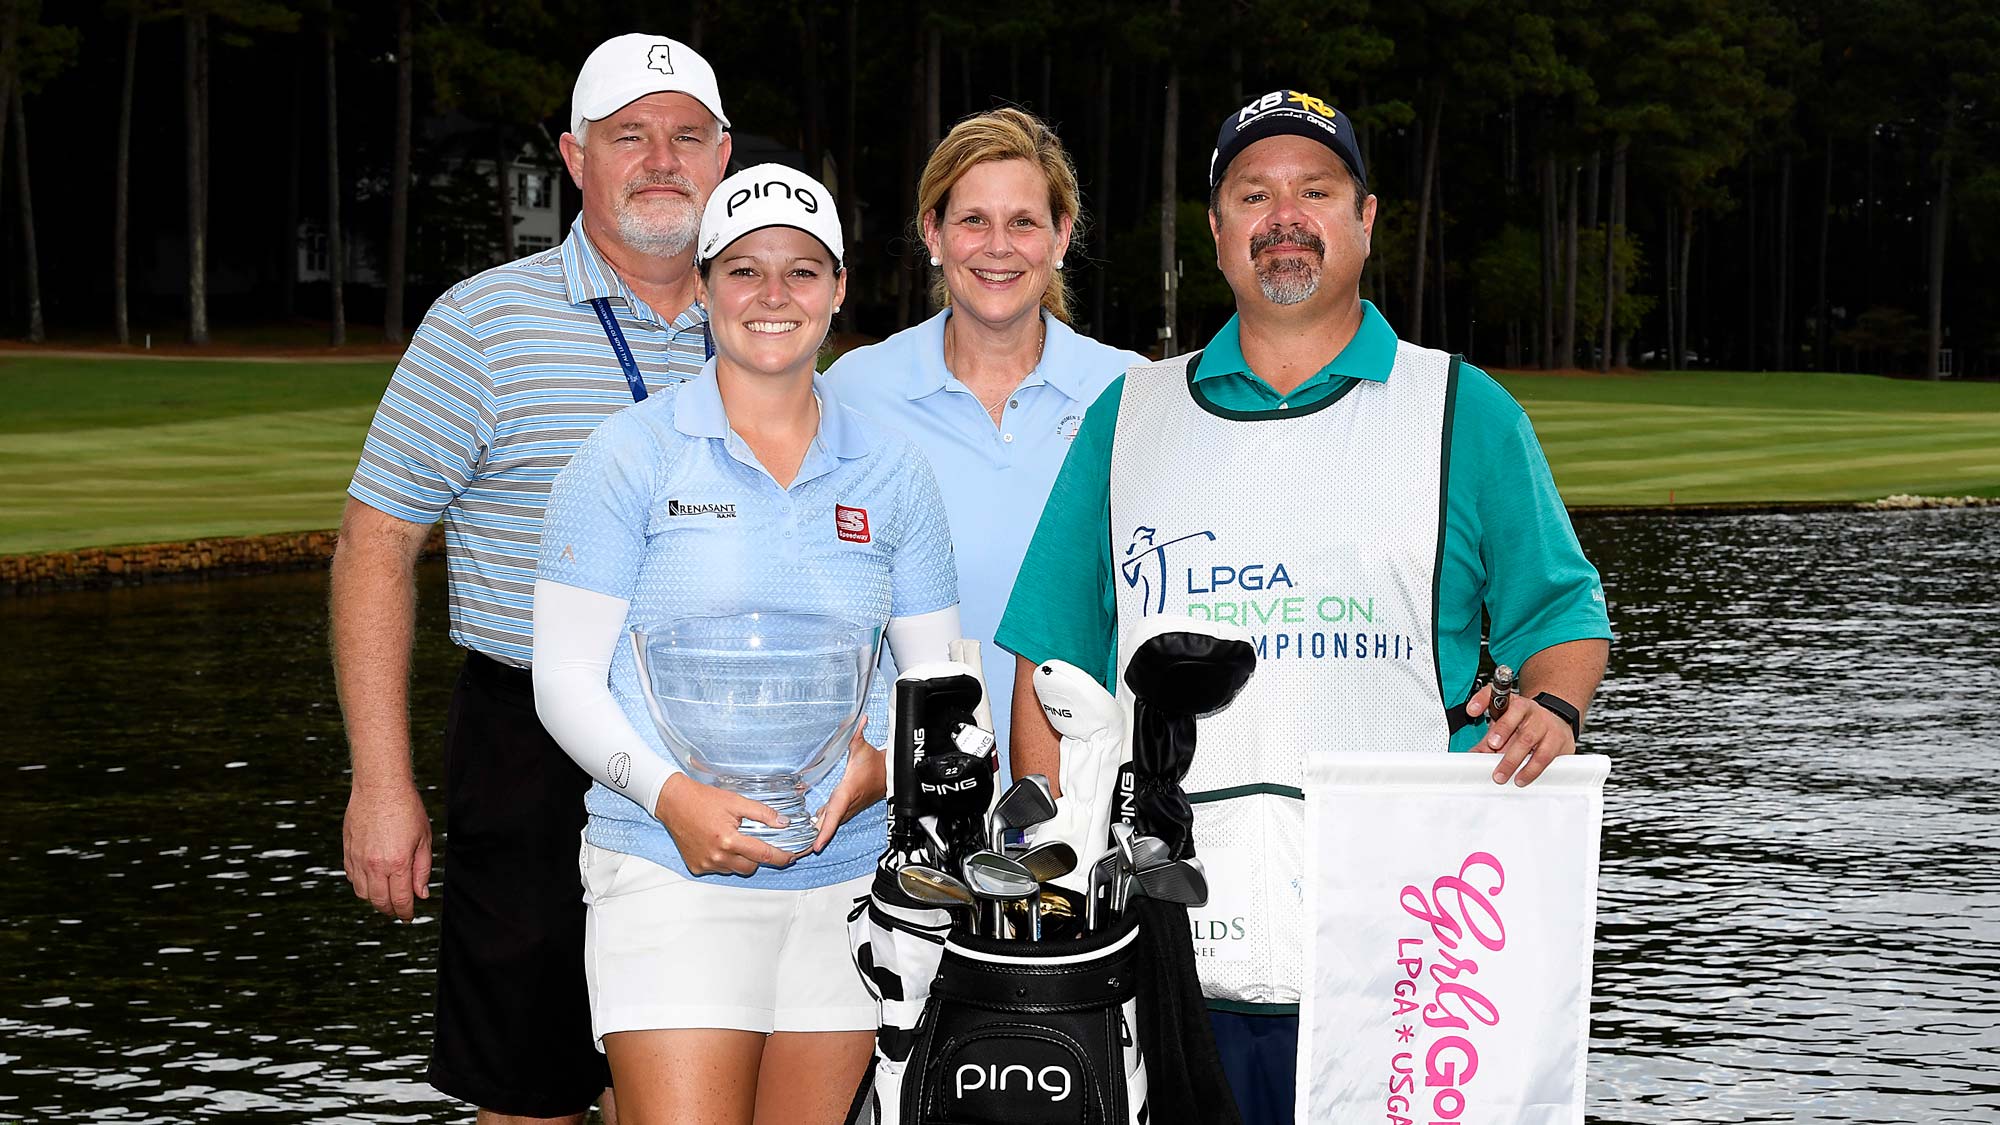 Ally McDonald poses with her parents and caddie as she holds the winner's trophy after winning the 2020 LPGA Drive On Championship at Reynolds Lake Oconee